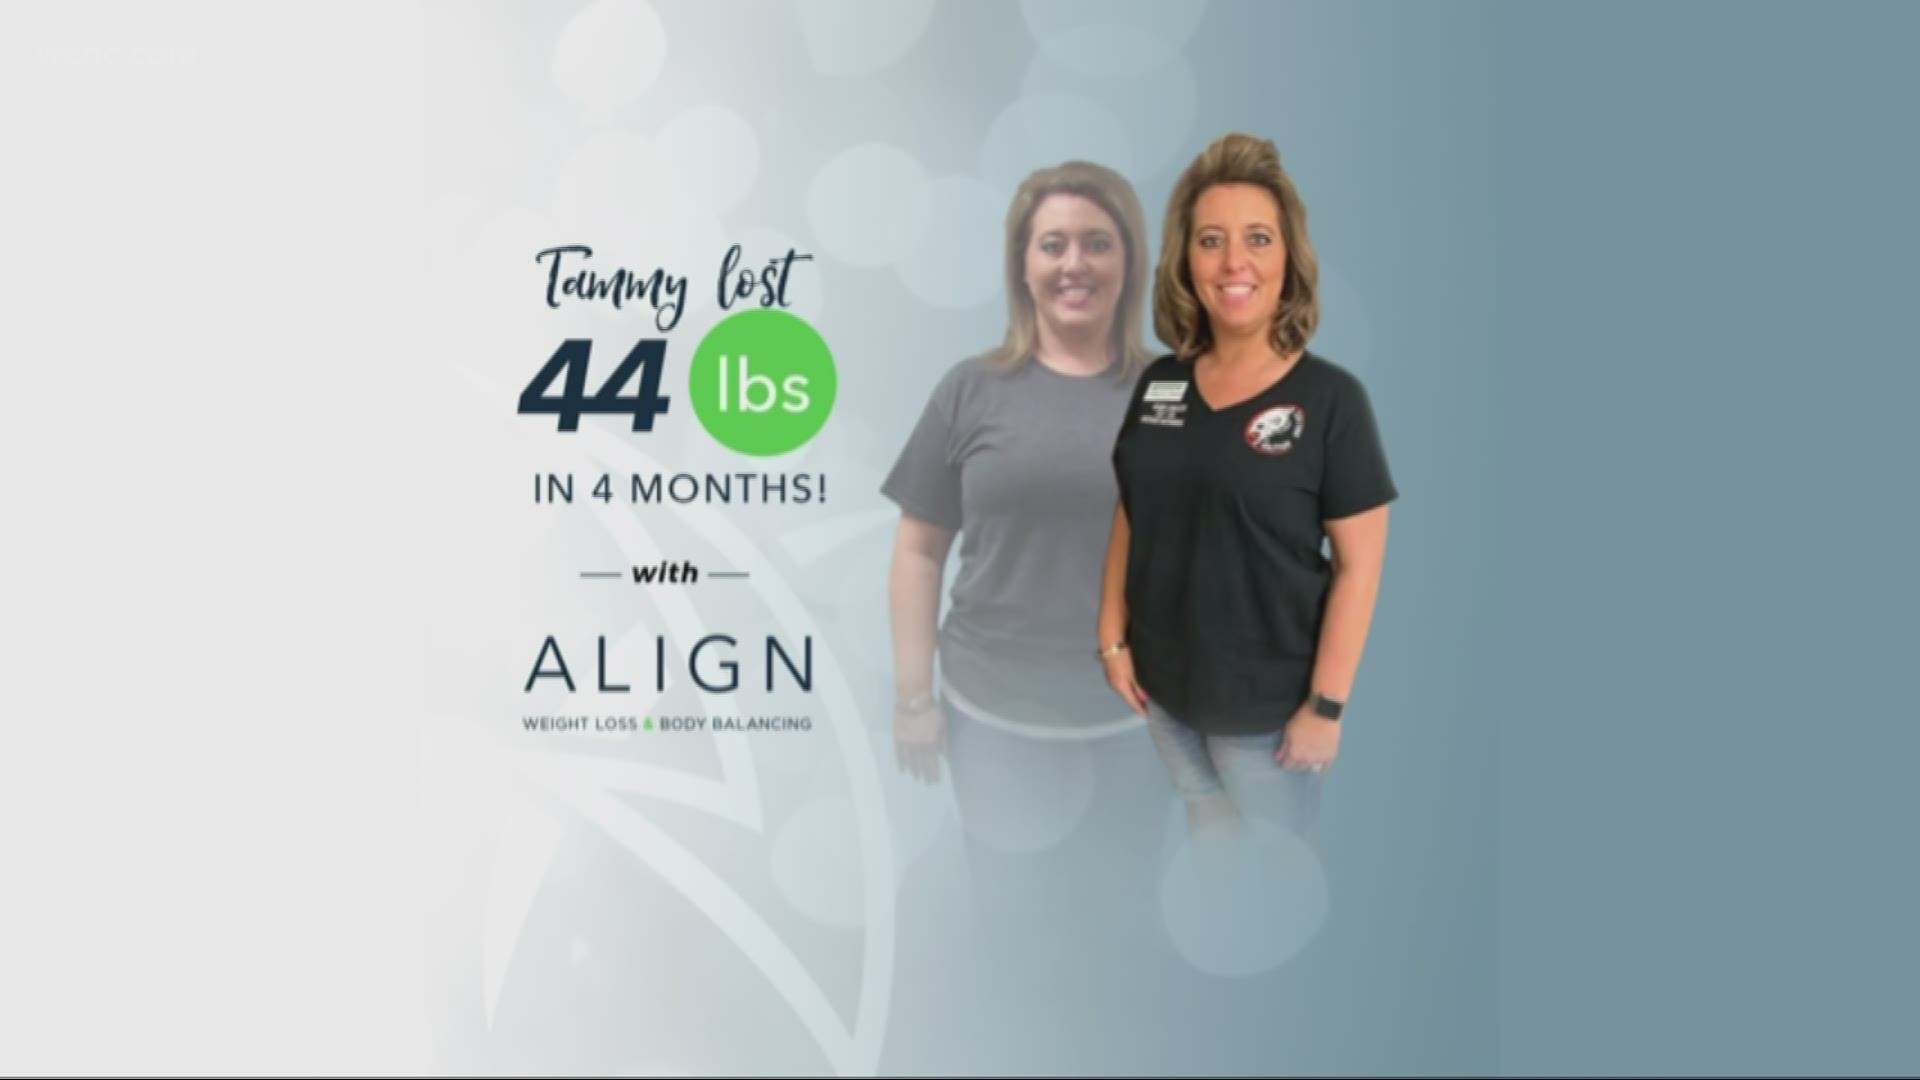 Align Weight Loss and Body Balancing creates custom plans to help people lose weight for good.